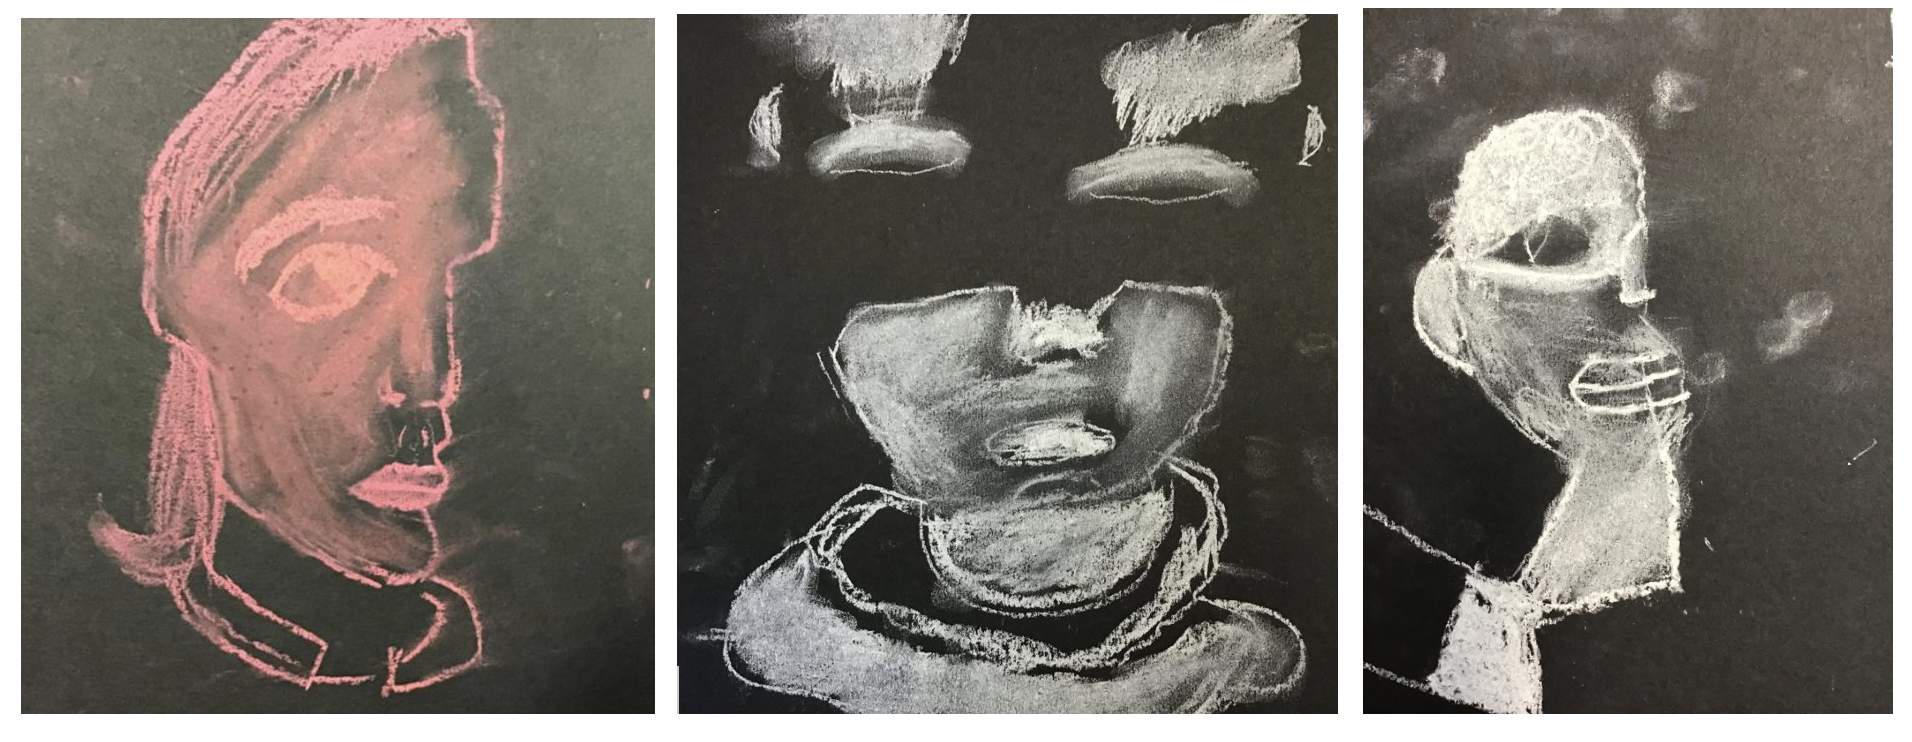 Exploring chiaroscuro with chalk on black paper